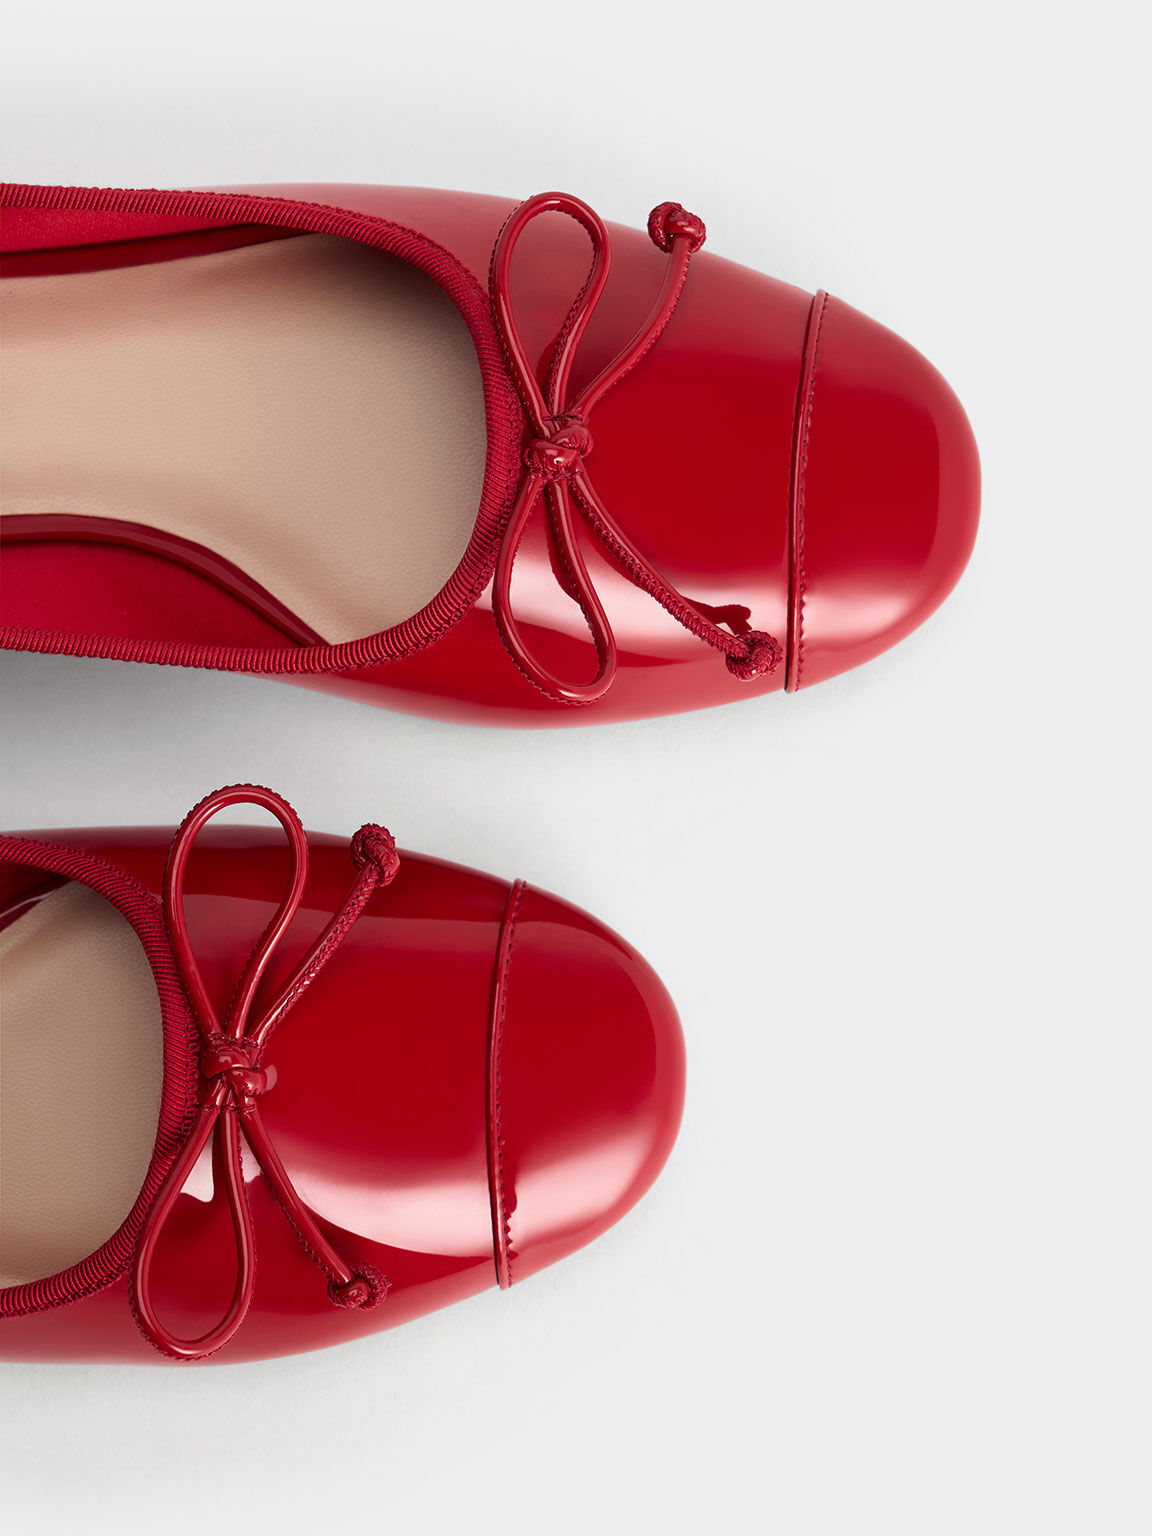 Red Ballet Flats for Every Occasion